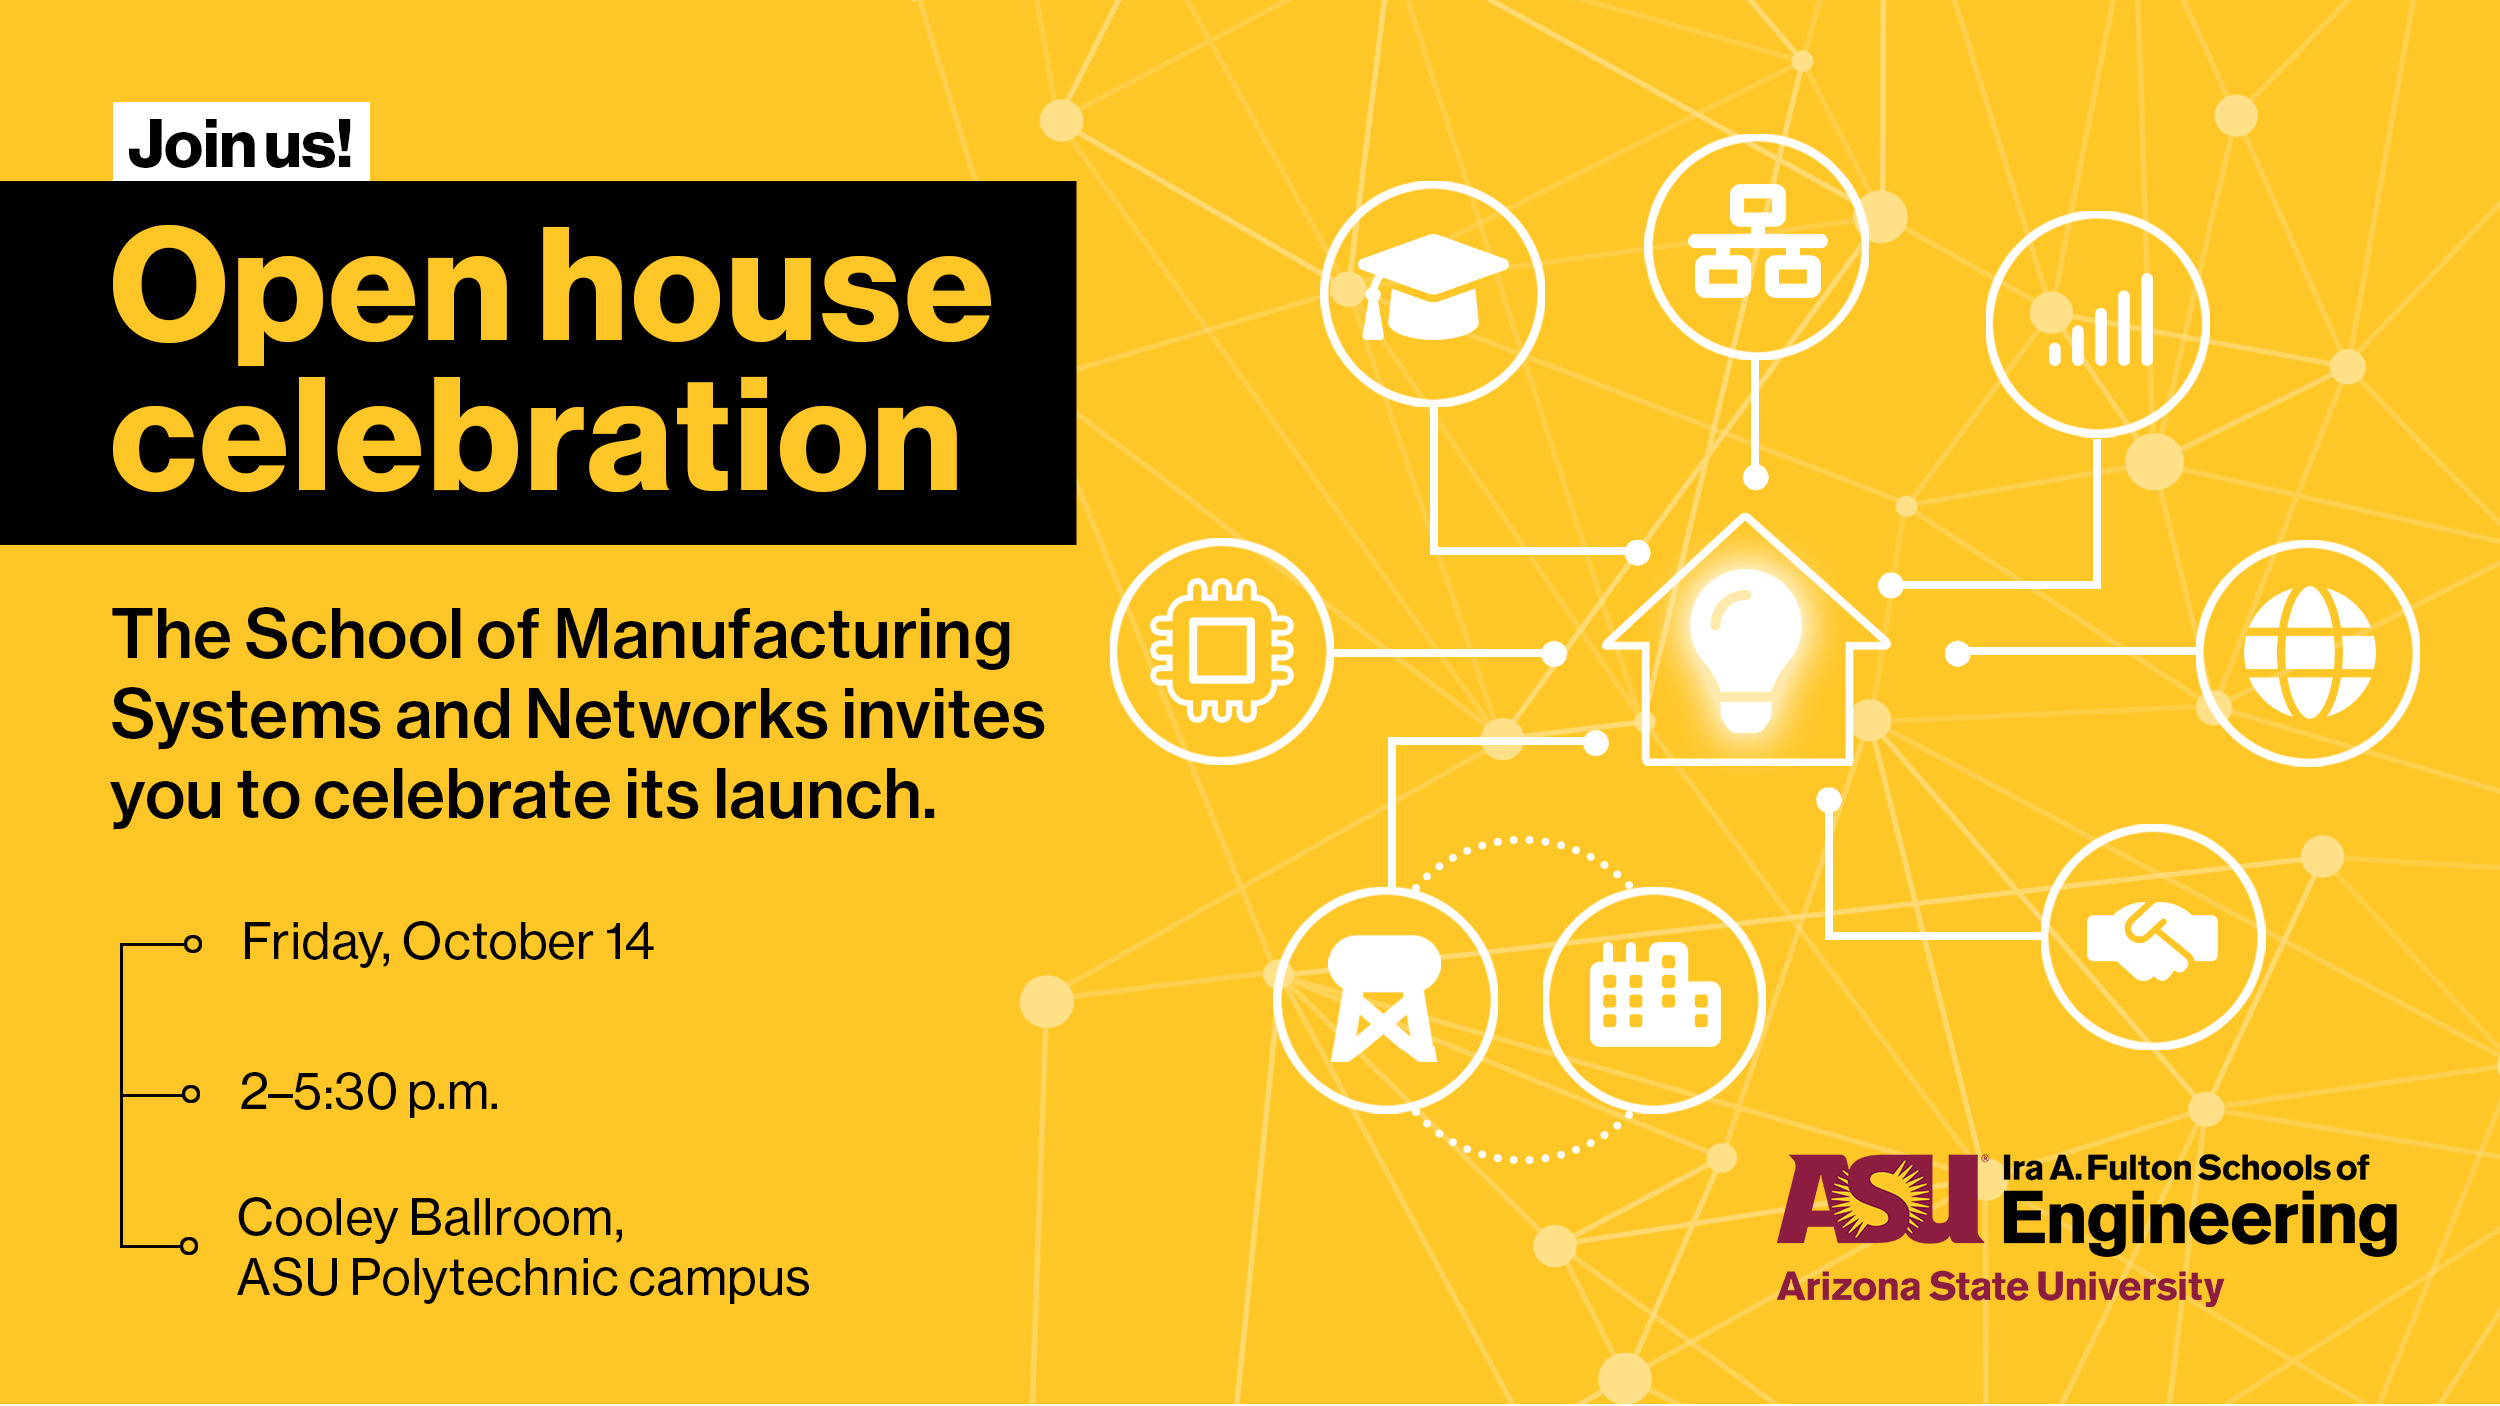 Join us! Open house celebration. The School of Manufacturing Systems and Networks invites you to celebrate its launch on Friday, October 14, 2022 from 2-5:30 p.m. in Cooley Ballrooms at the ASU Polytechnic campus.